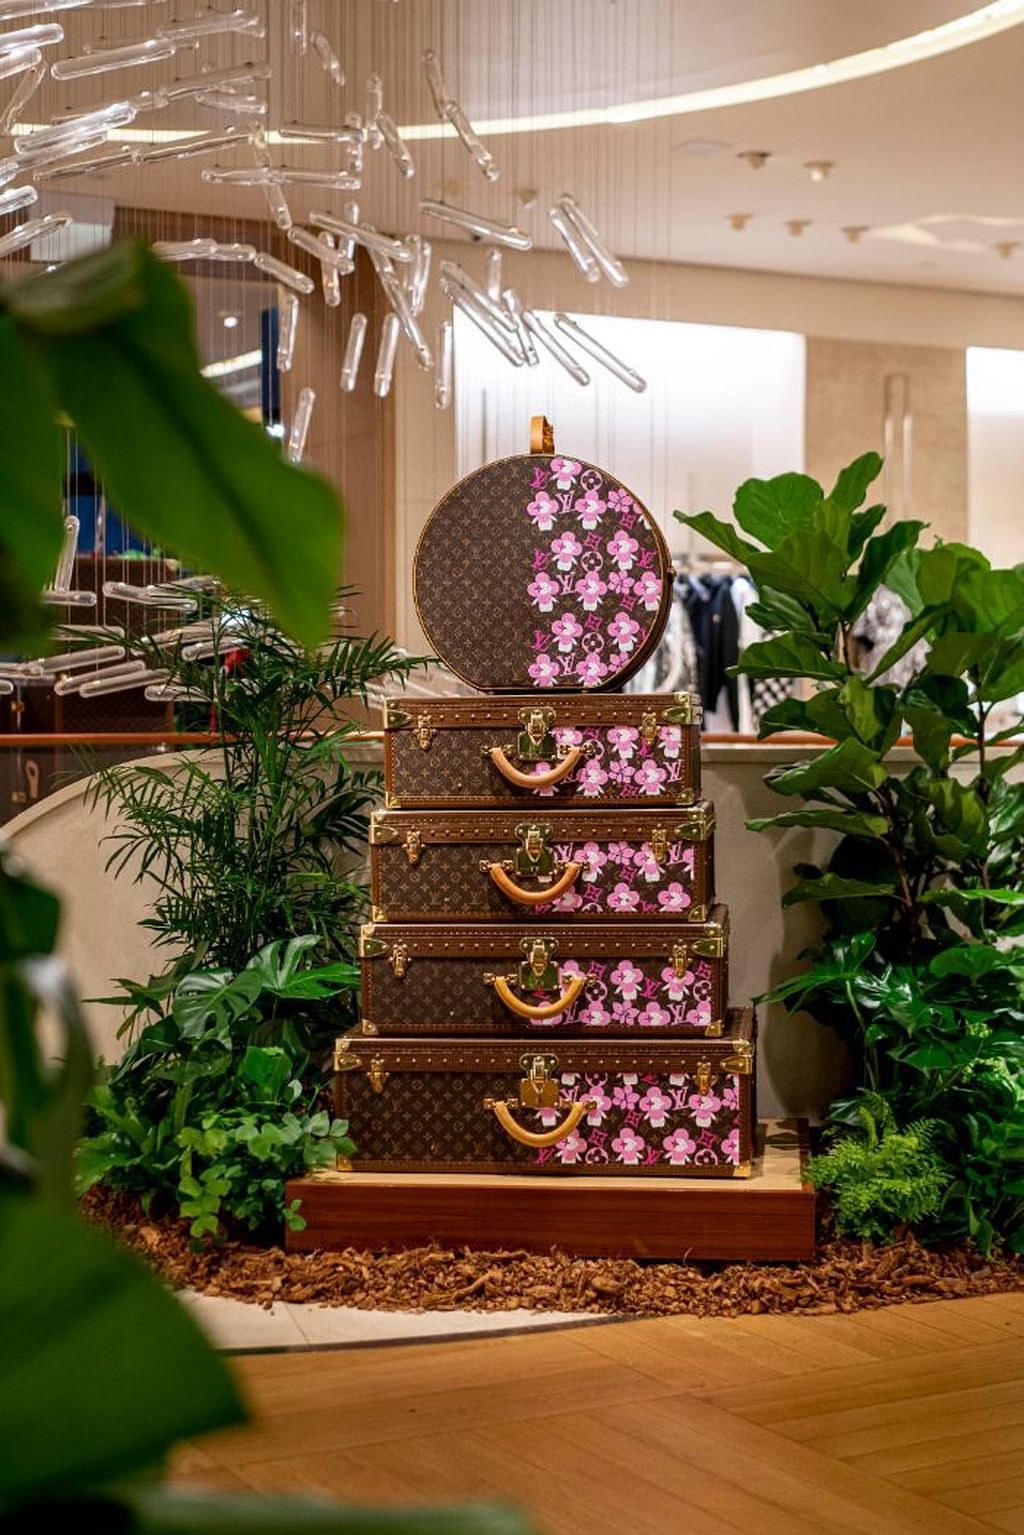 Discover Louis Vuitton's savoire faire in an oasis getaway - The